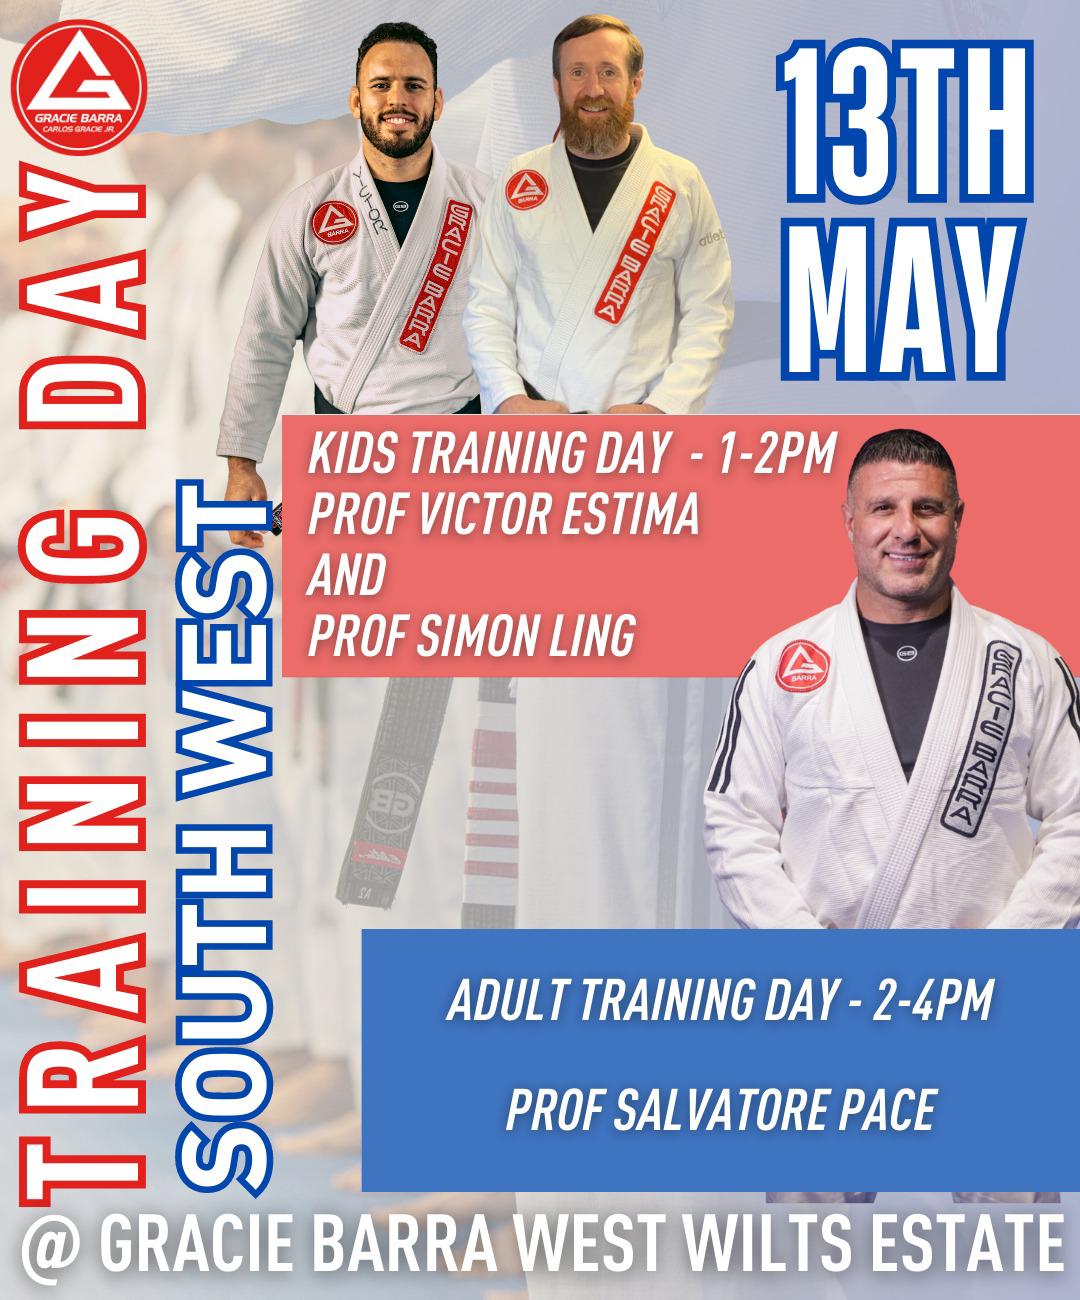 Training day 13th May